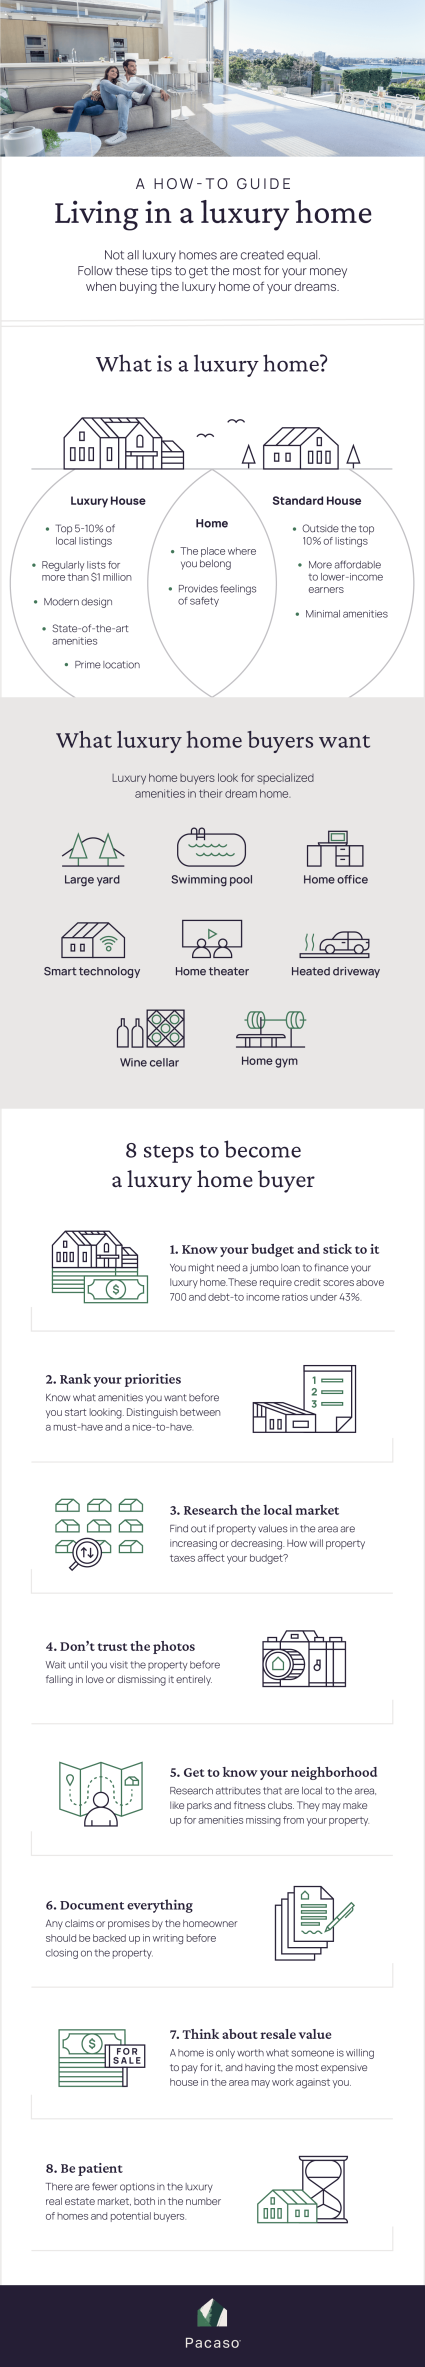 An infographic provides insights into the luxury real estate market.